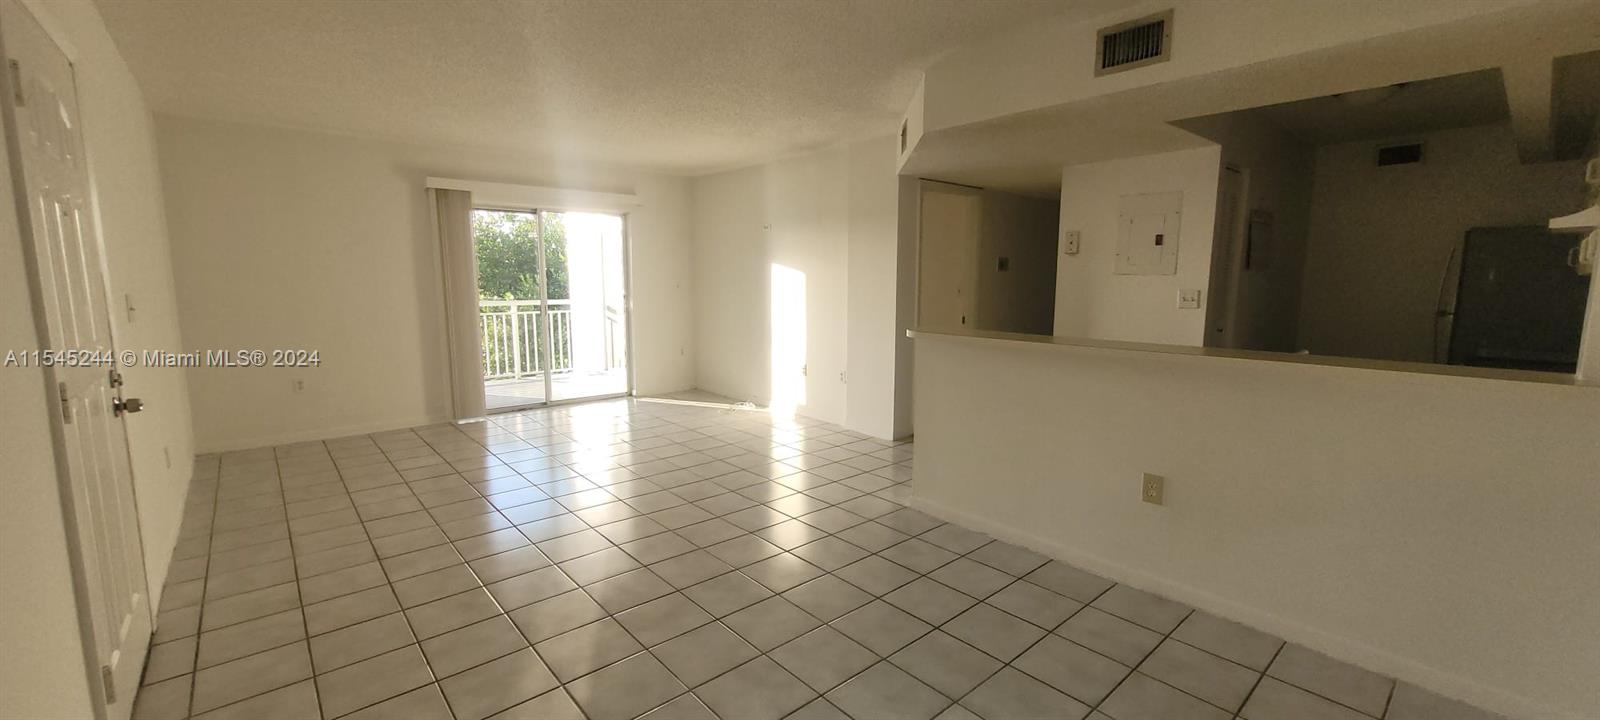 Very Nice Corner 2/2, With 2 Big Master Bedrooms, W&D Included In a Private Balcony Looking At The Garden. Very Secure Area And Community With Entry Gate Controlled. Best Amenities In Cutler Bay, Pool, Jacuzzi, Tennis, Fitness, Kids Playground, Elementary And High School In Front And 1 Block Away. Water And Sewer Included. Pet Ok Under 20 Pounds 1 Parking Spot Included and Possible 1 Or 2 More Spots for a Very Low Fee. All Showings via showing request, 3 Months To Move In, Background Check, Credit Report, Last 3 Paystubs and Last Bank Statement. FAST APPROVAL, NO APLICATION FEE, when approved just pay $100 for Gate Fob pass, car sticker and Community ID/adult